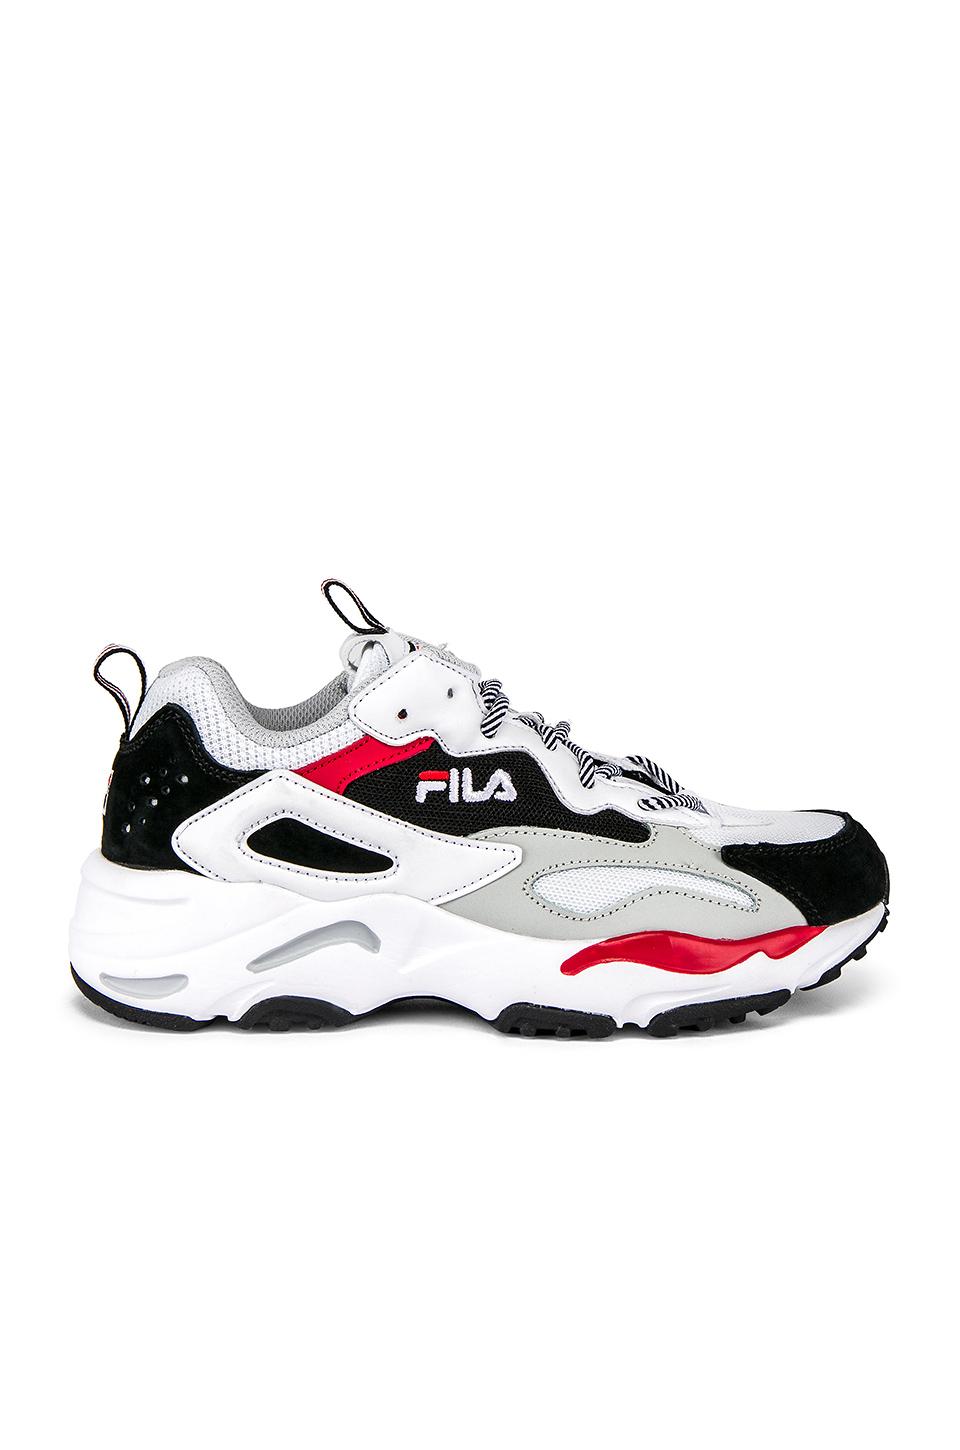 Fila Ray Tracer in (White) - Lyst